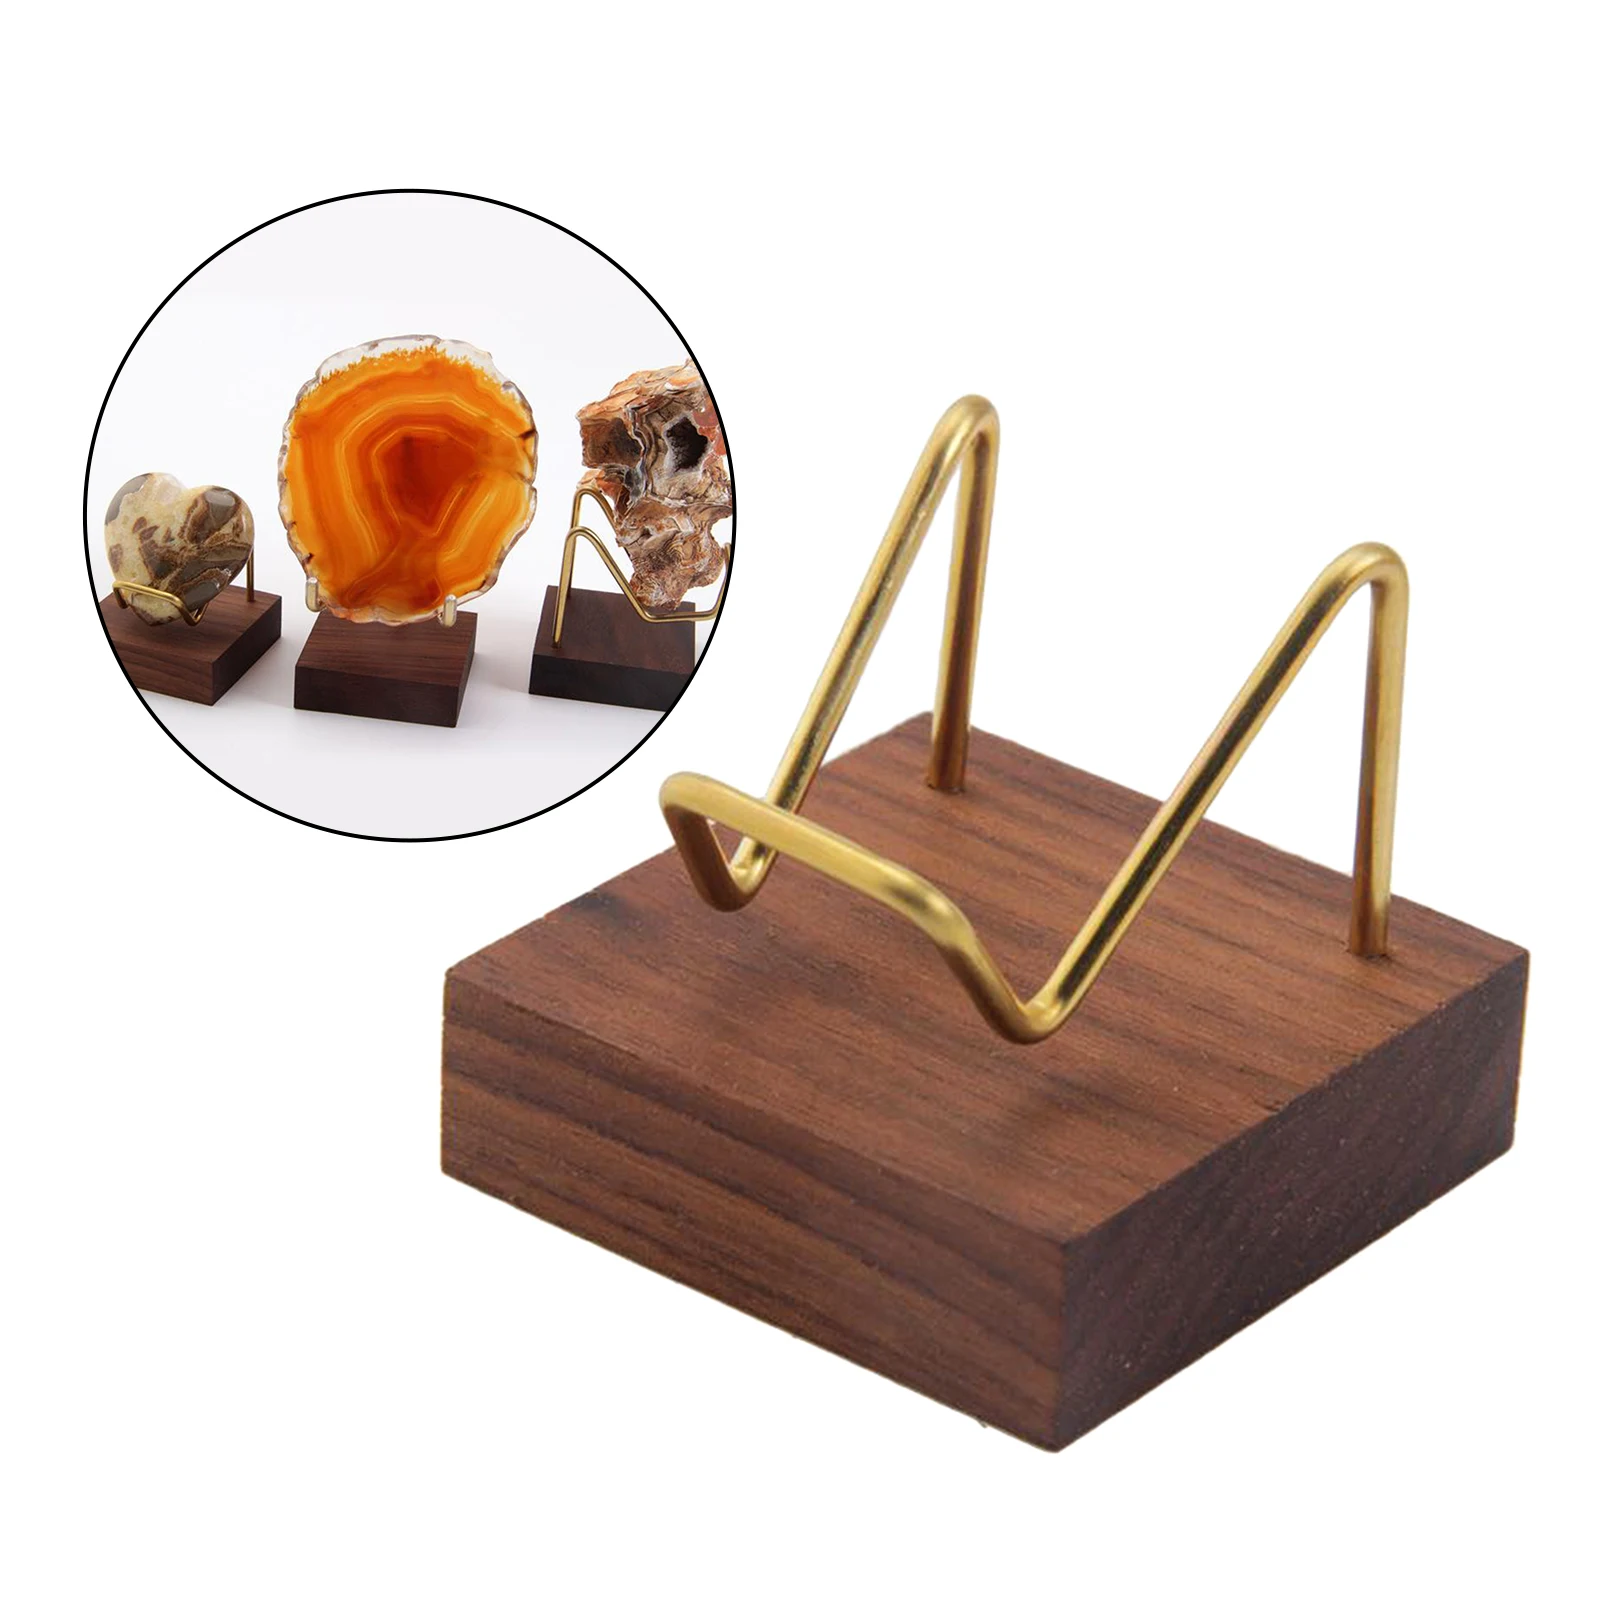 Details about   10pcs Resin Wooden Stand Base For Crystal Ball Base Home Decoration Wholesale 